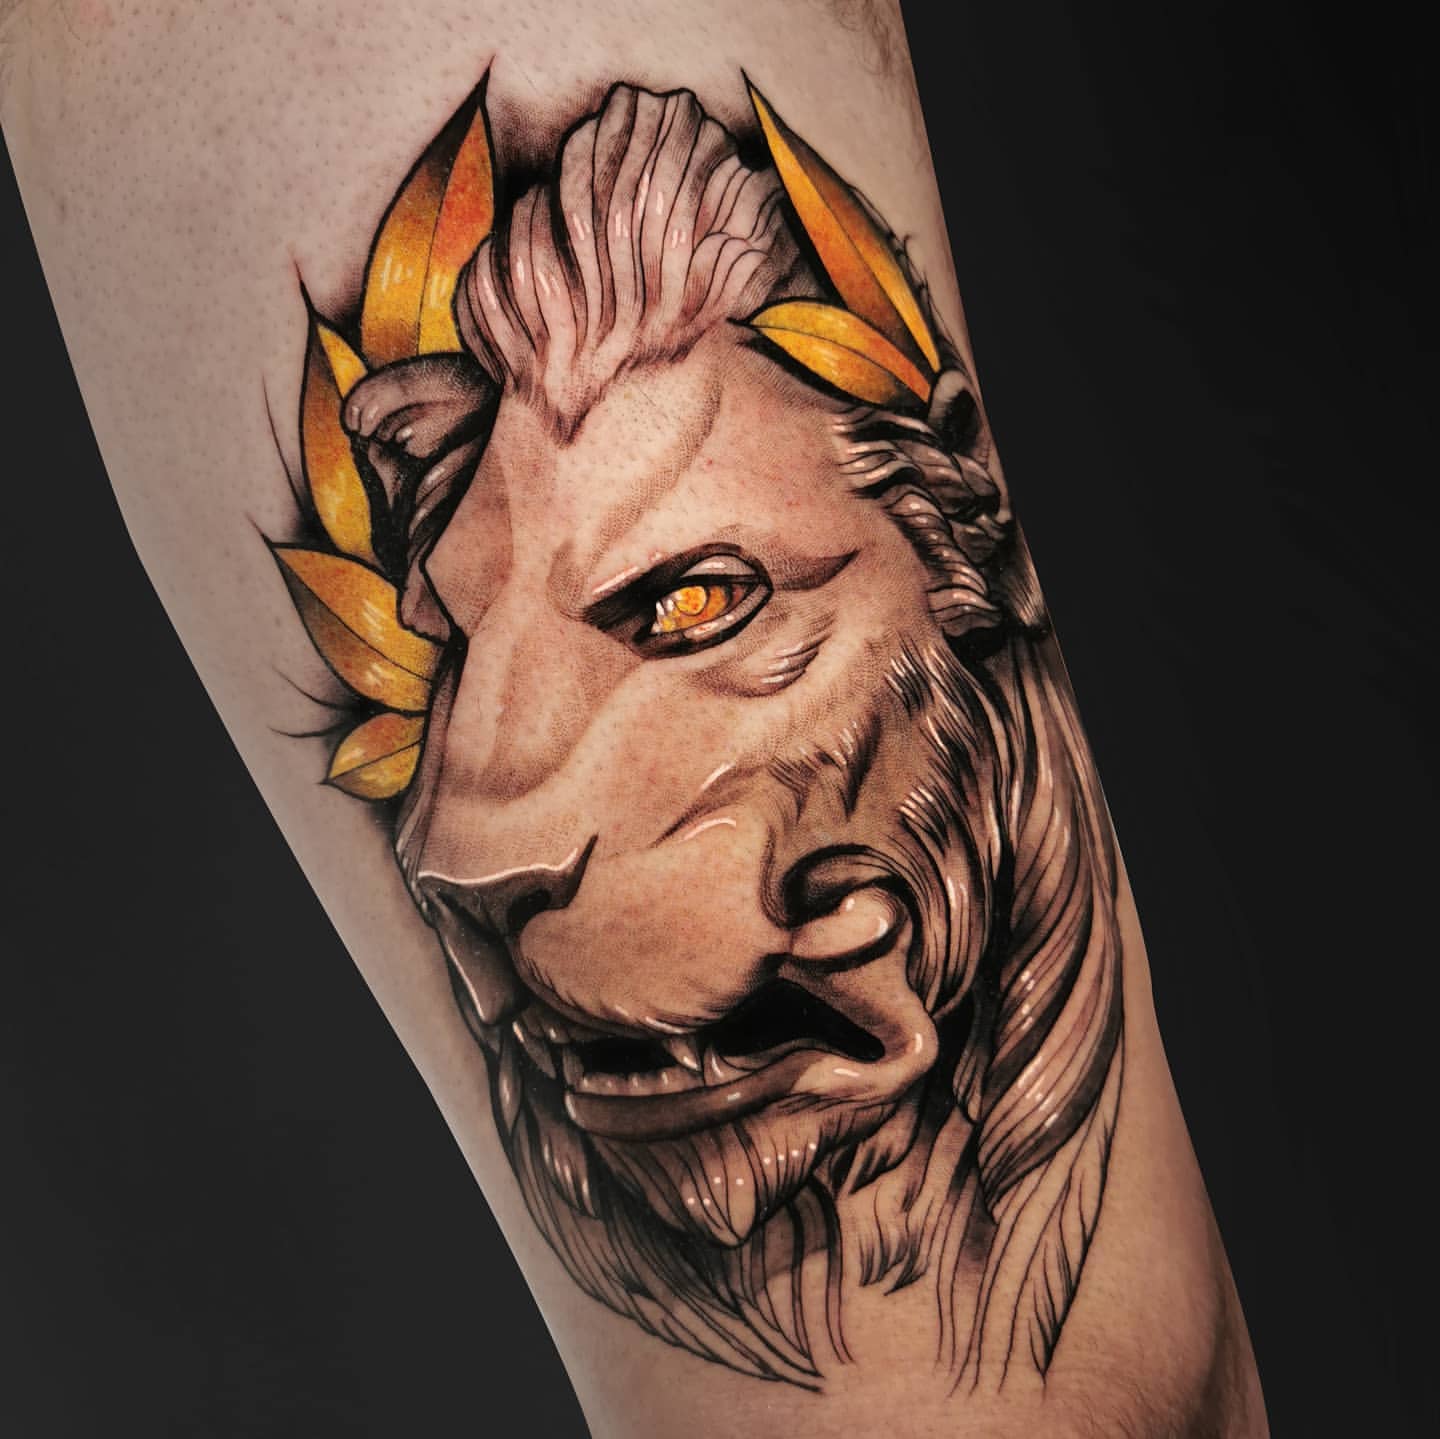 arms with tattoo designs including prominent lion